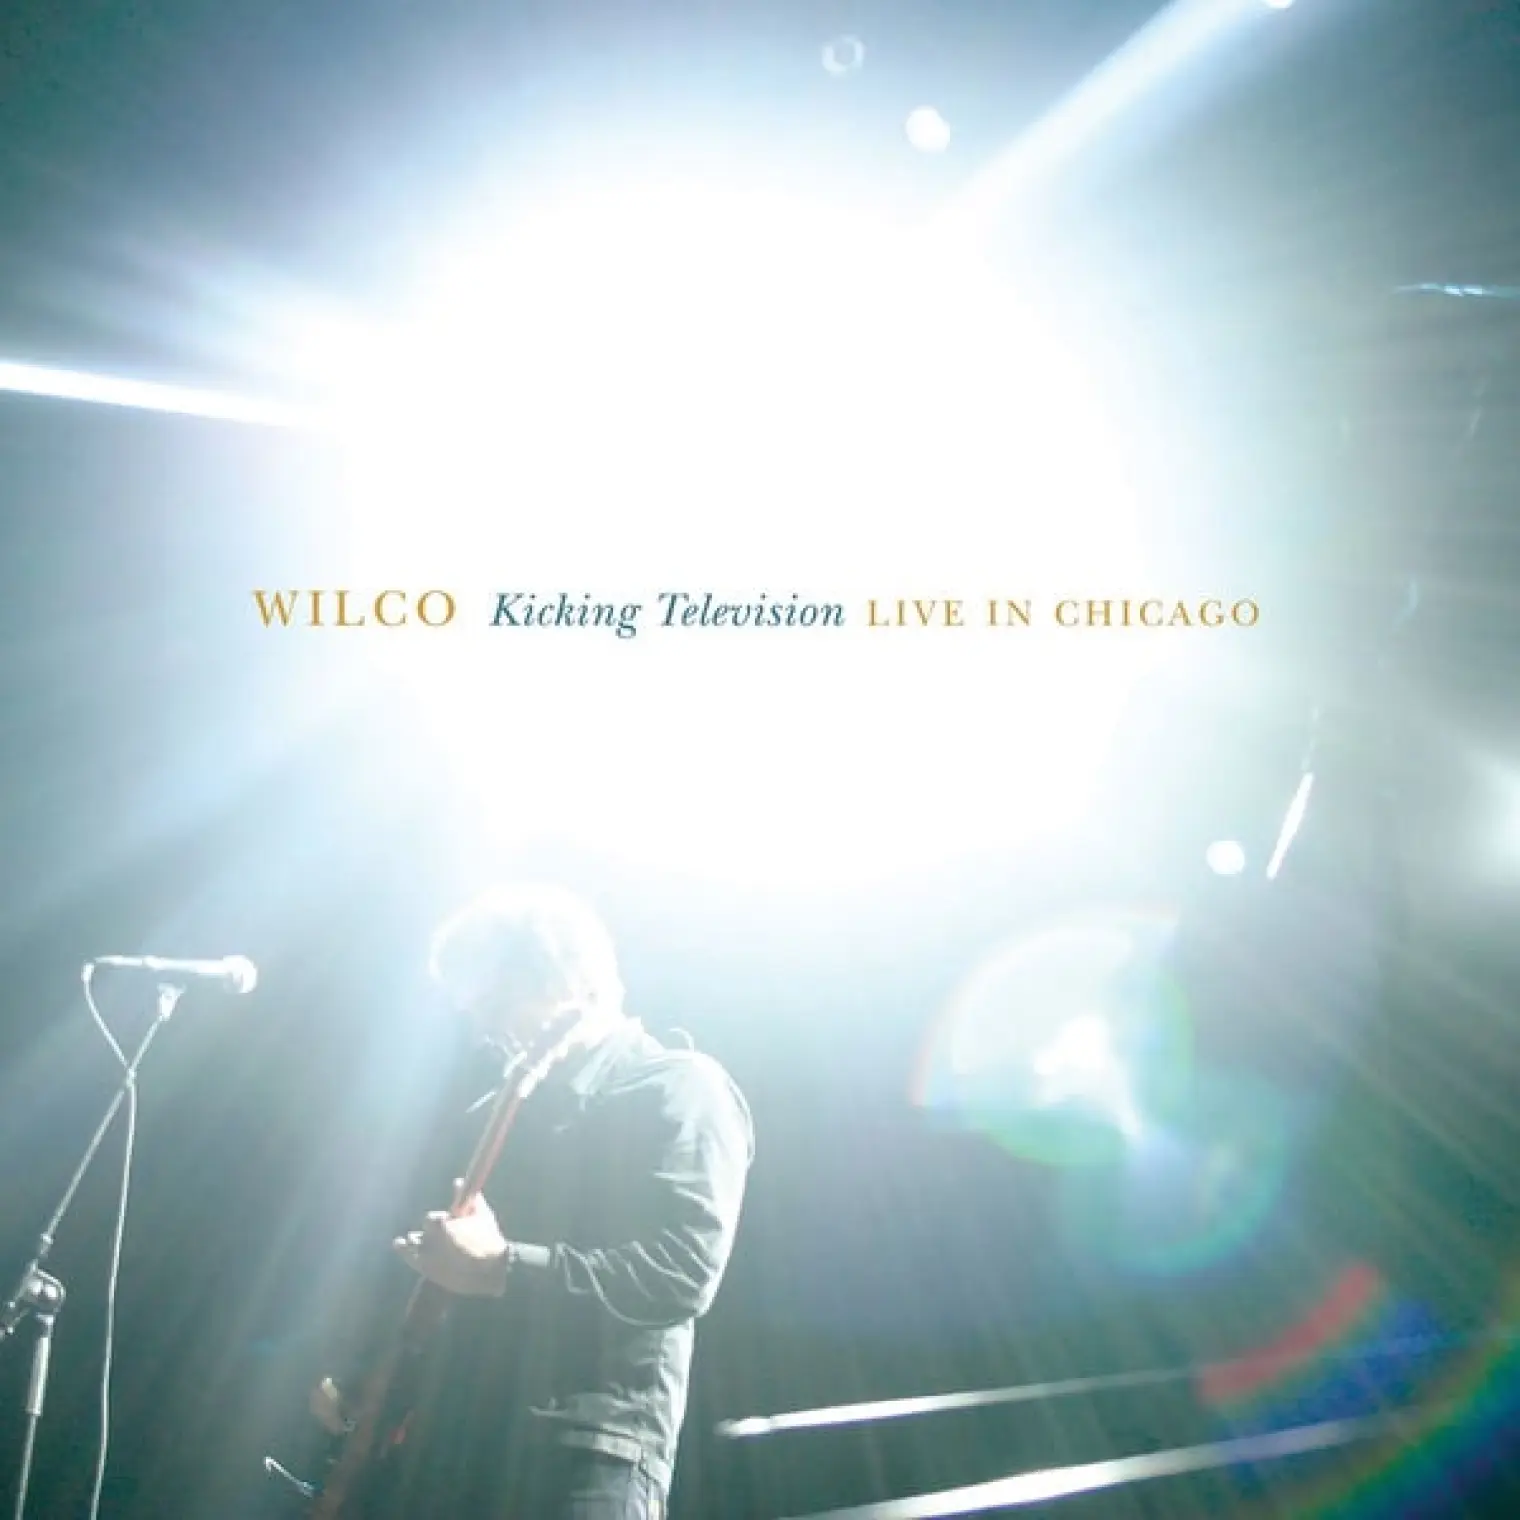 Kicking Television, Live in Chicago -  Wilco 